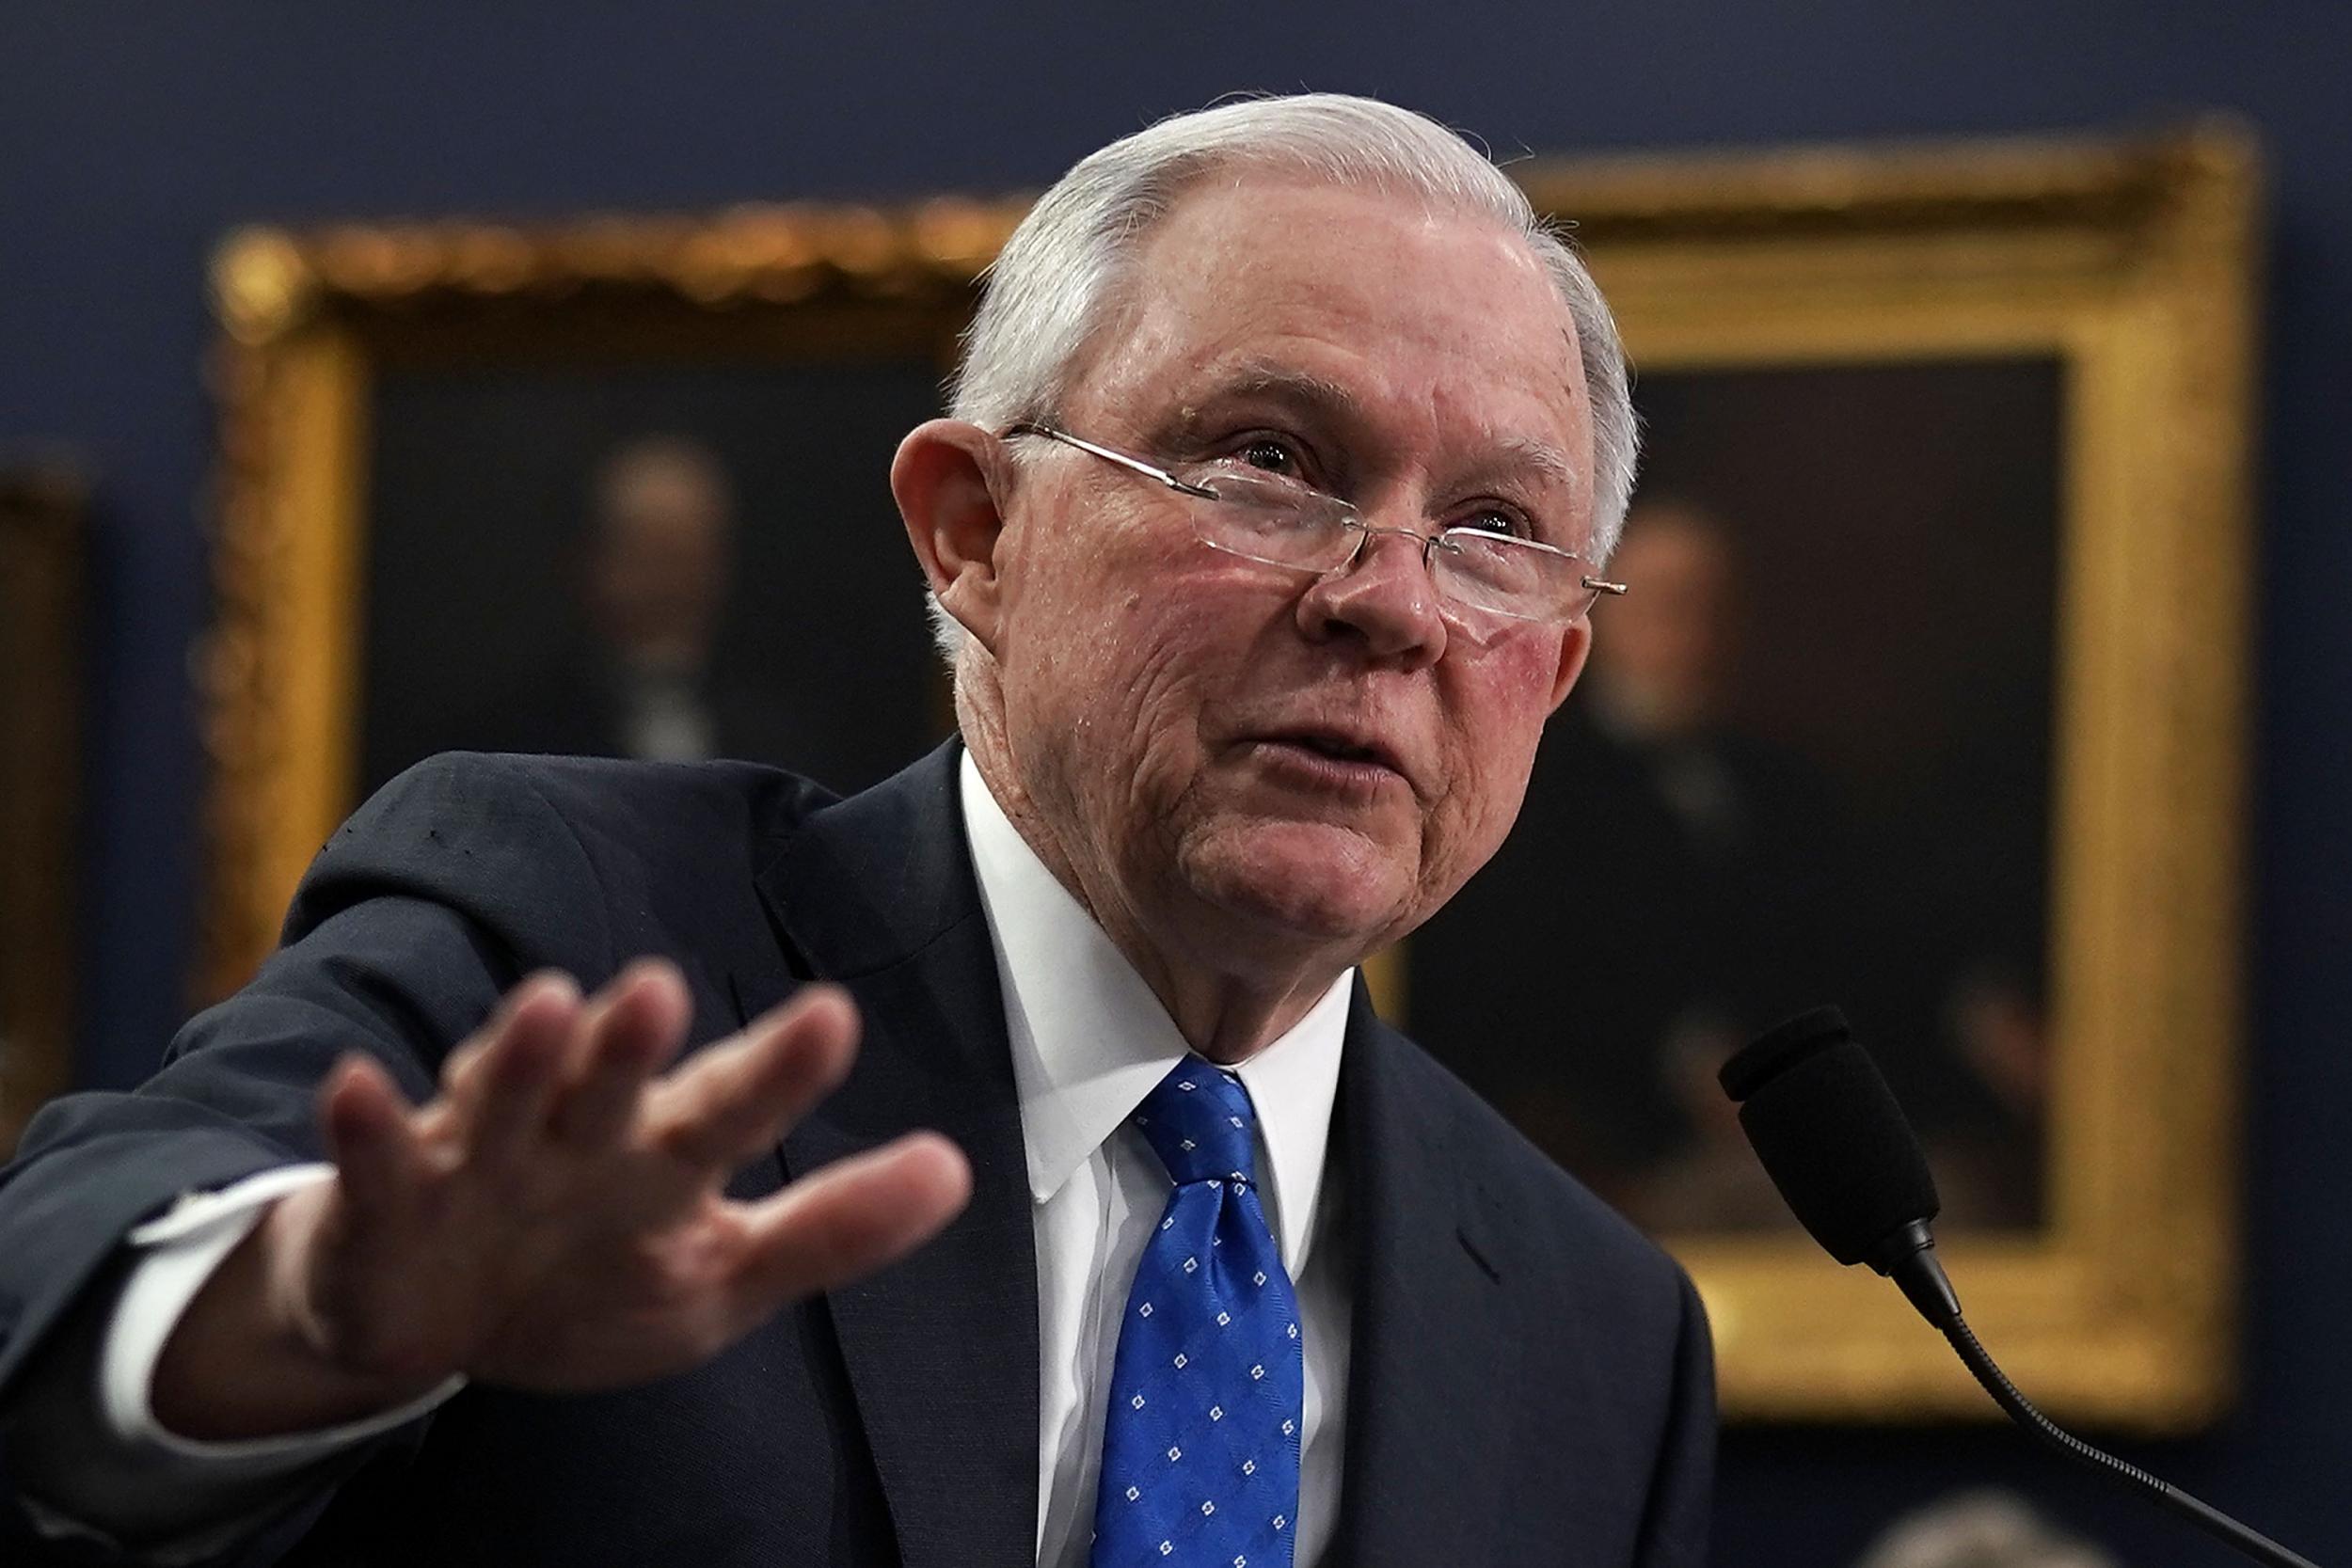 Attorney General Jeff Sessions testifies during a hearing before the Commerce, Justice, Science, and Related Agencies Subcommittee of the House Appropriations Committee